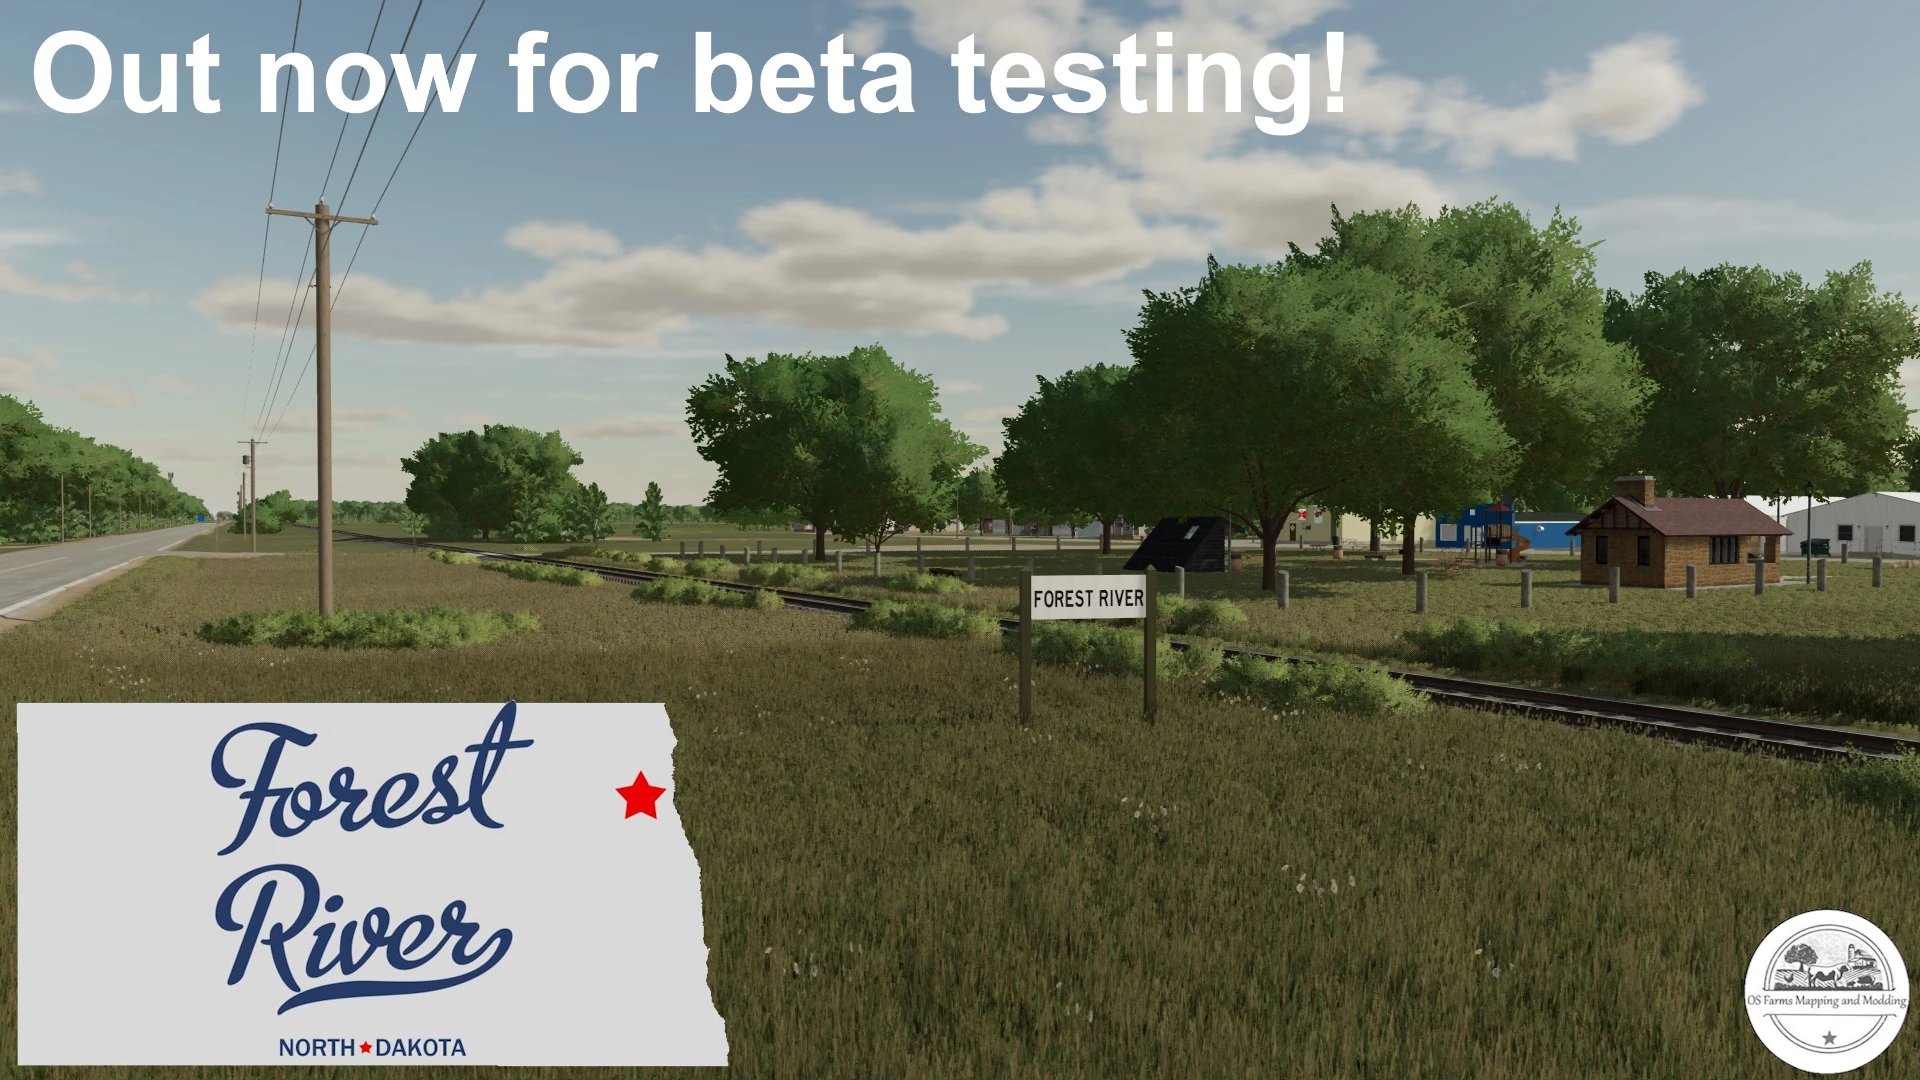 Forest River North Dakota 4x map is now out to testers!